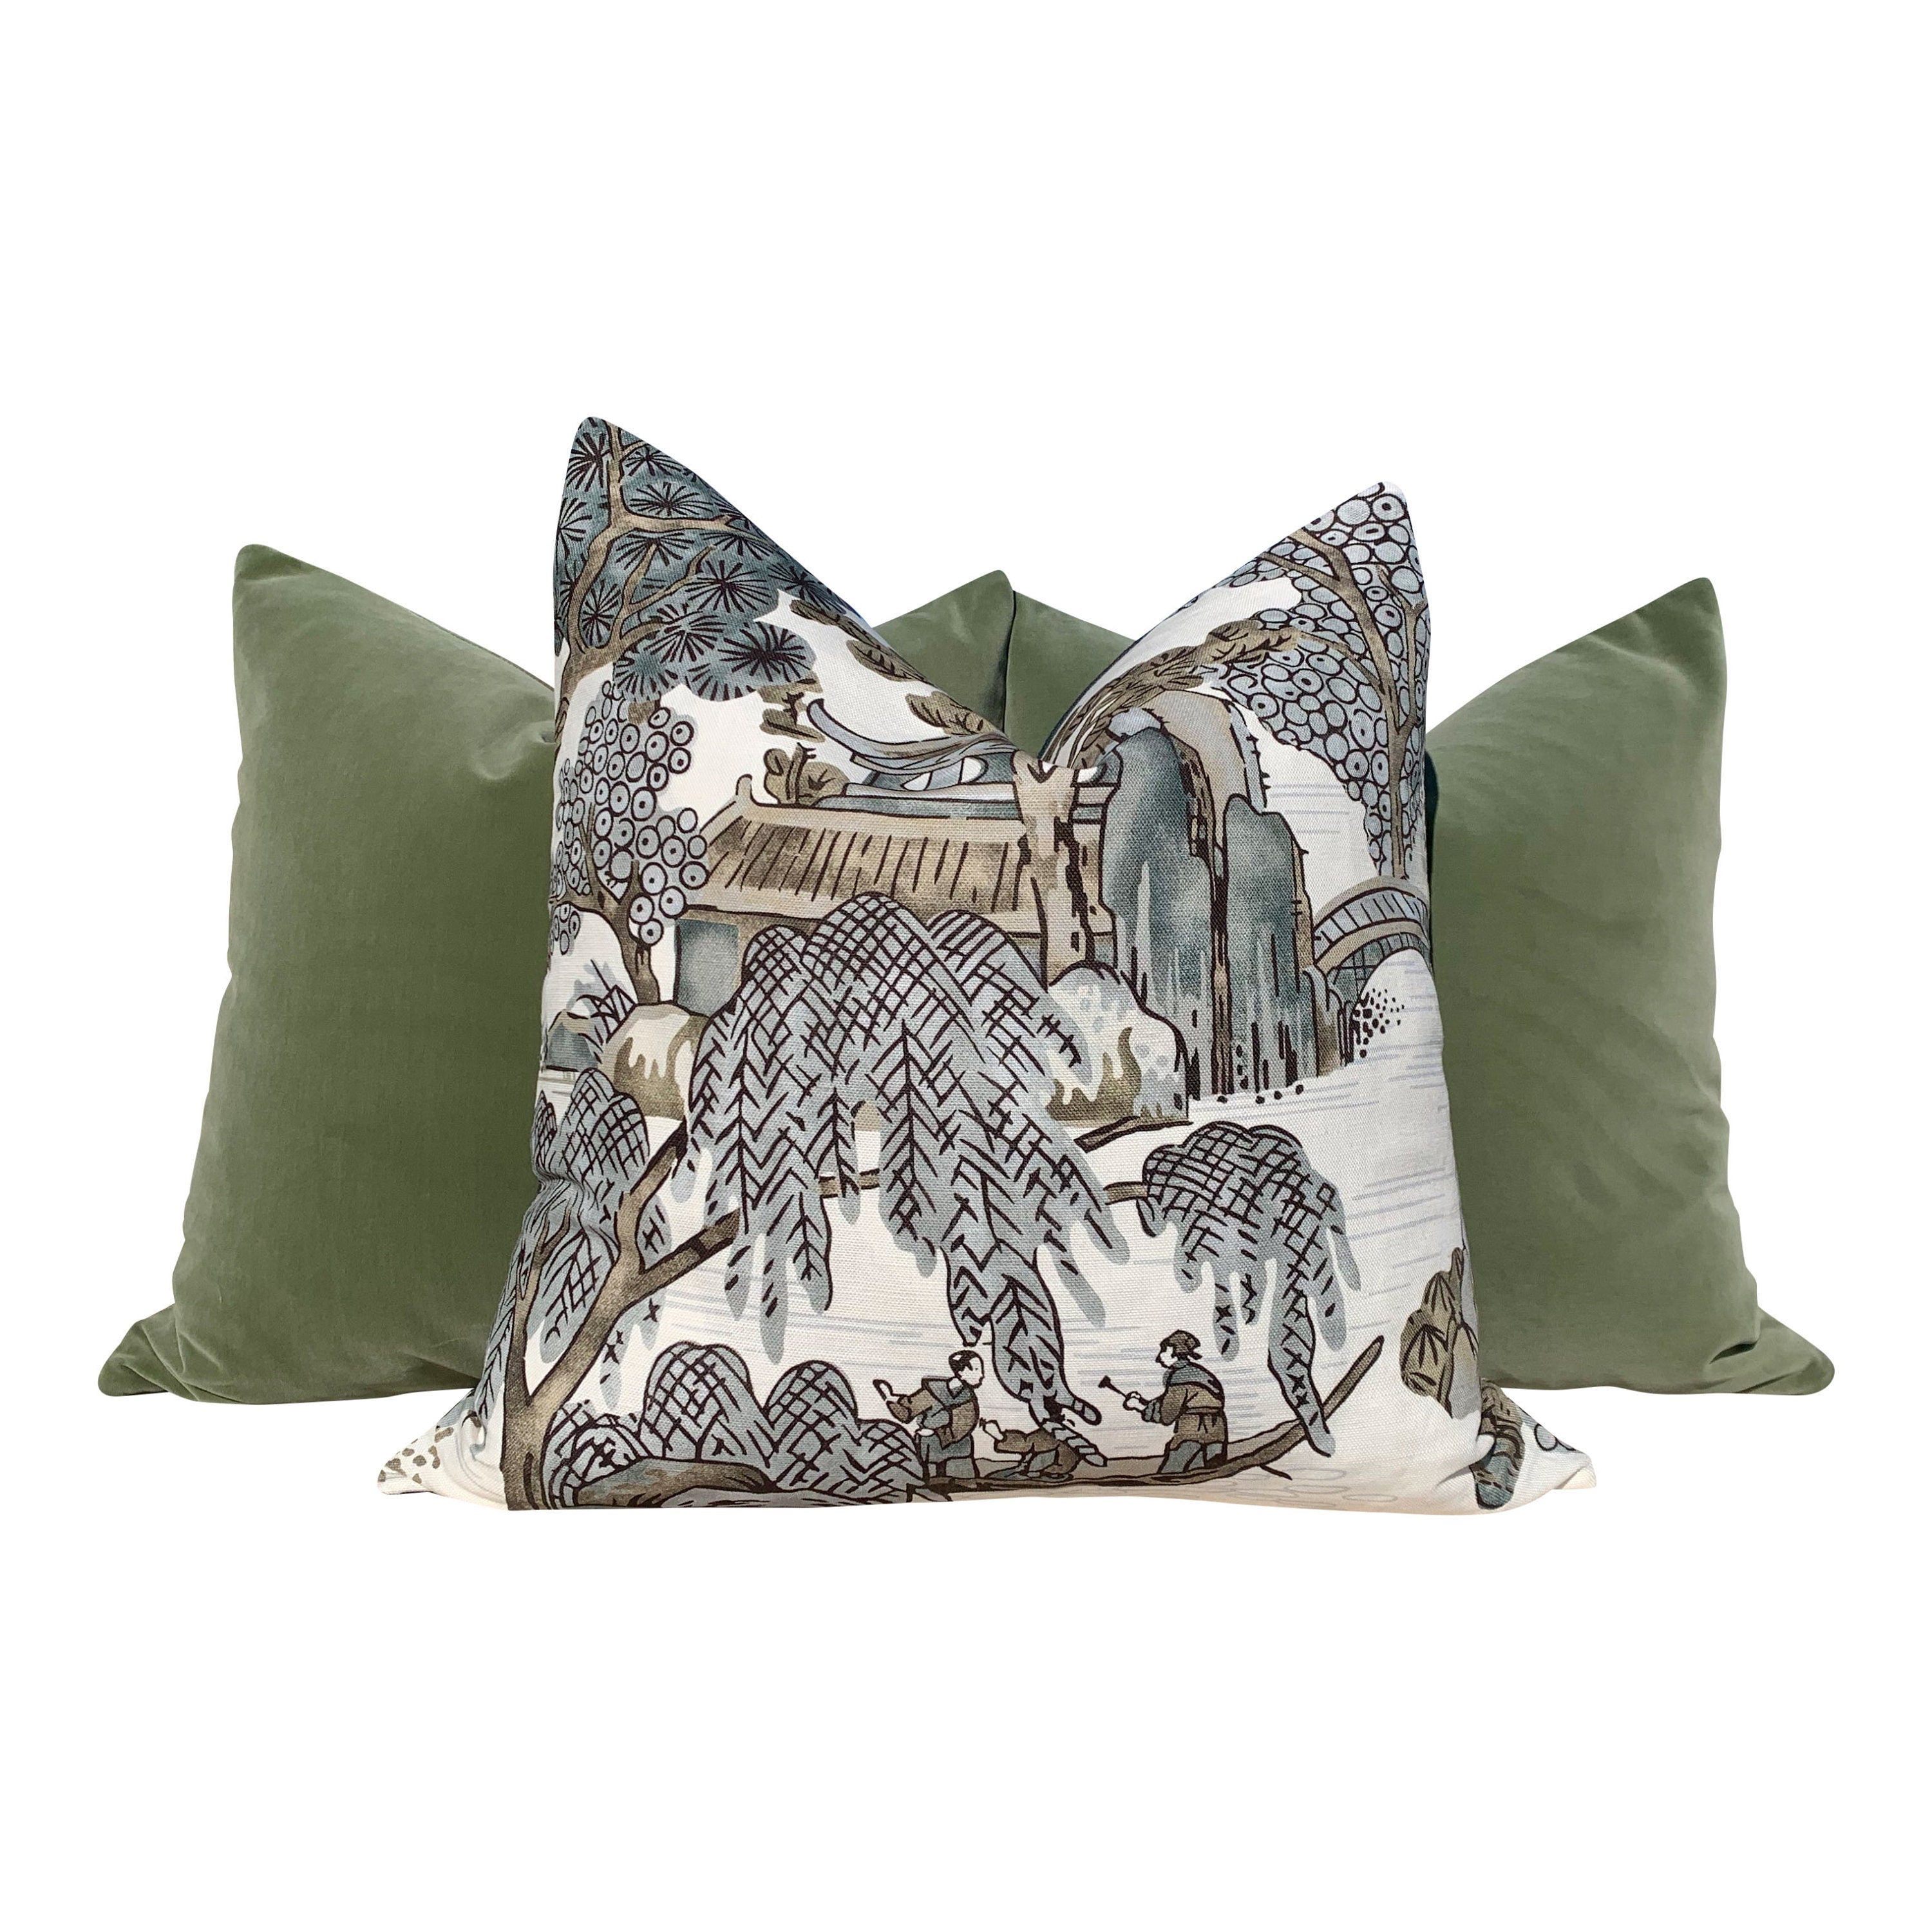 Thibaut "Asian Scenic" Pillow In Gray. Chinoiserie Lumbar Decorative Pillow in Gray.